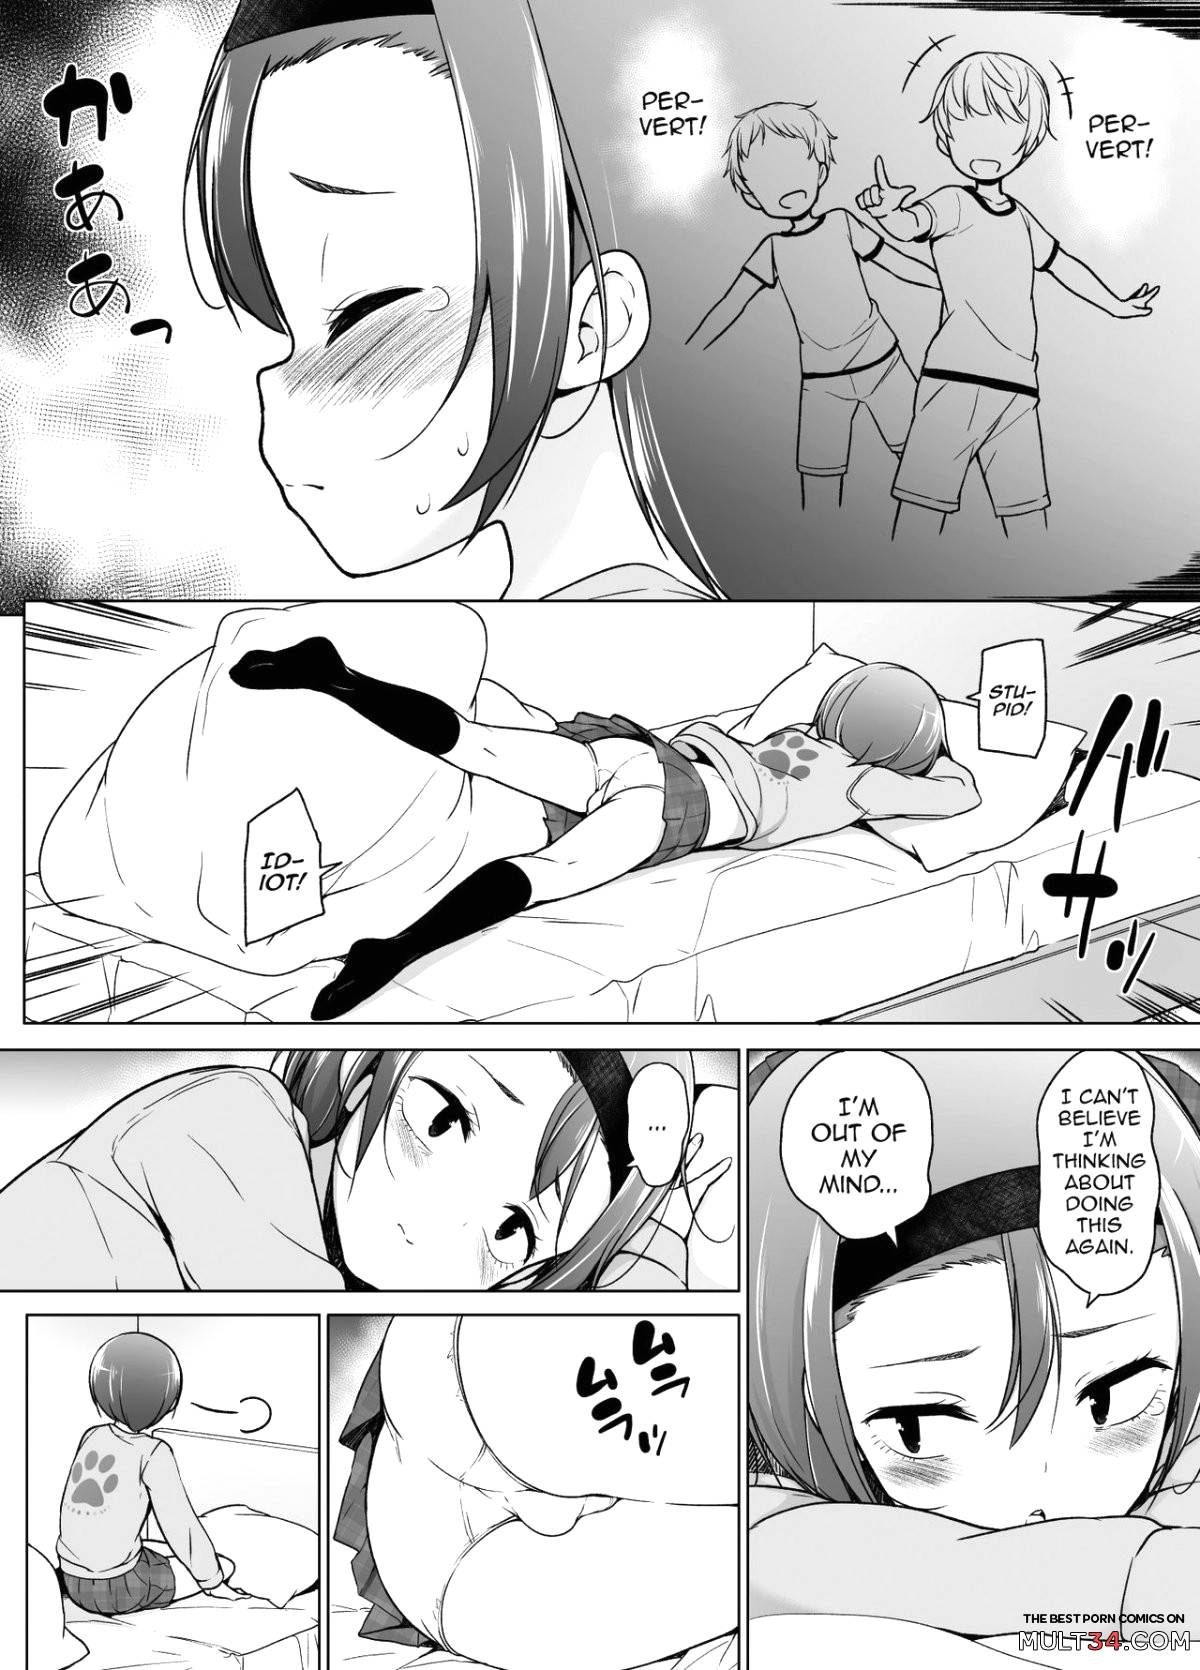 The Pervert page 7